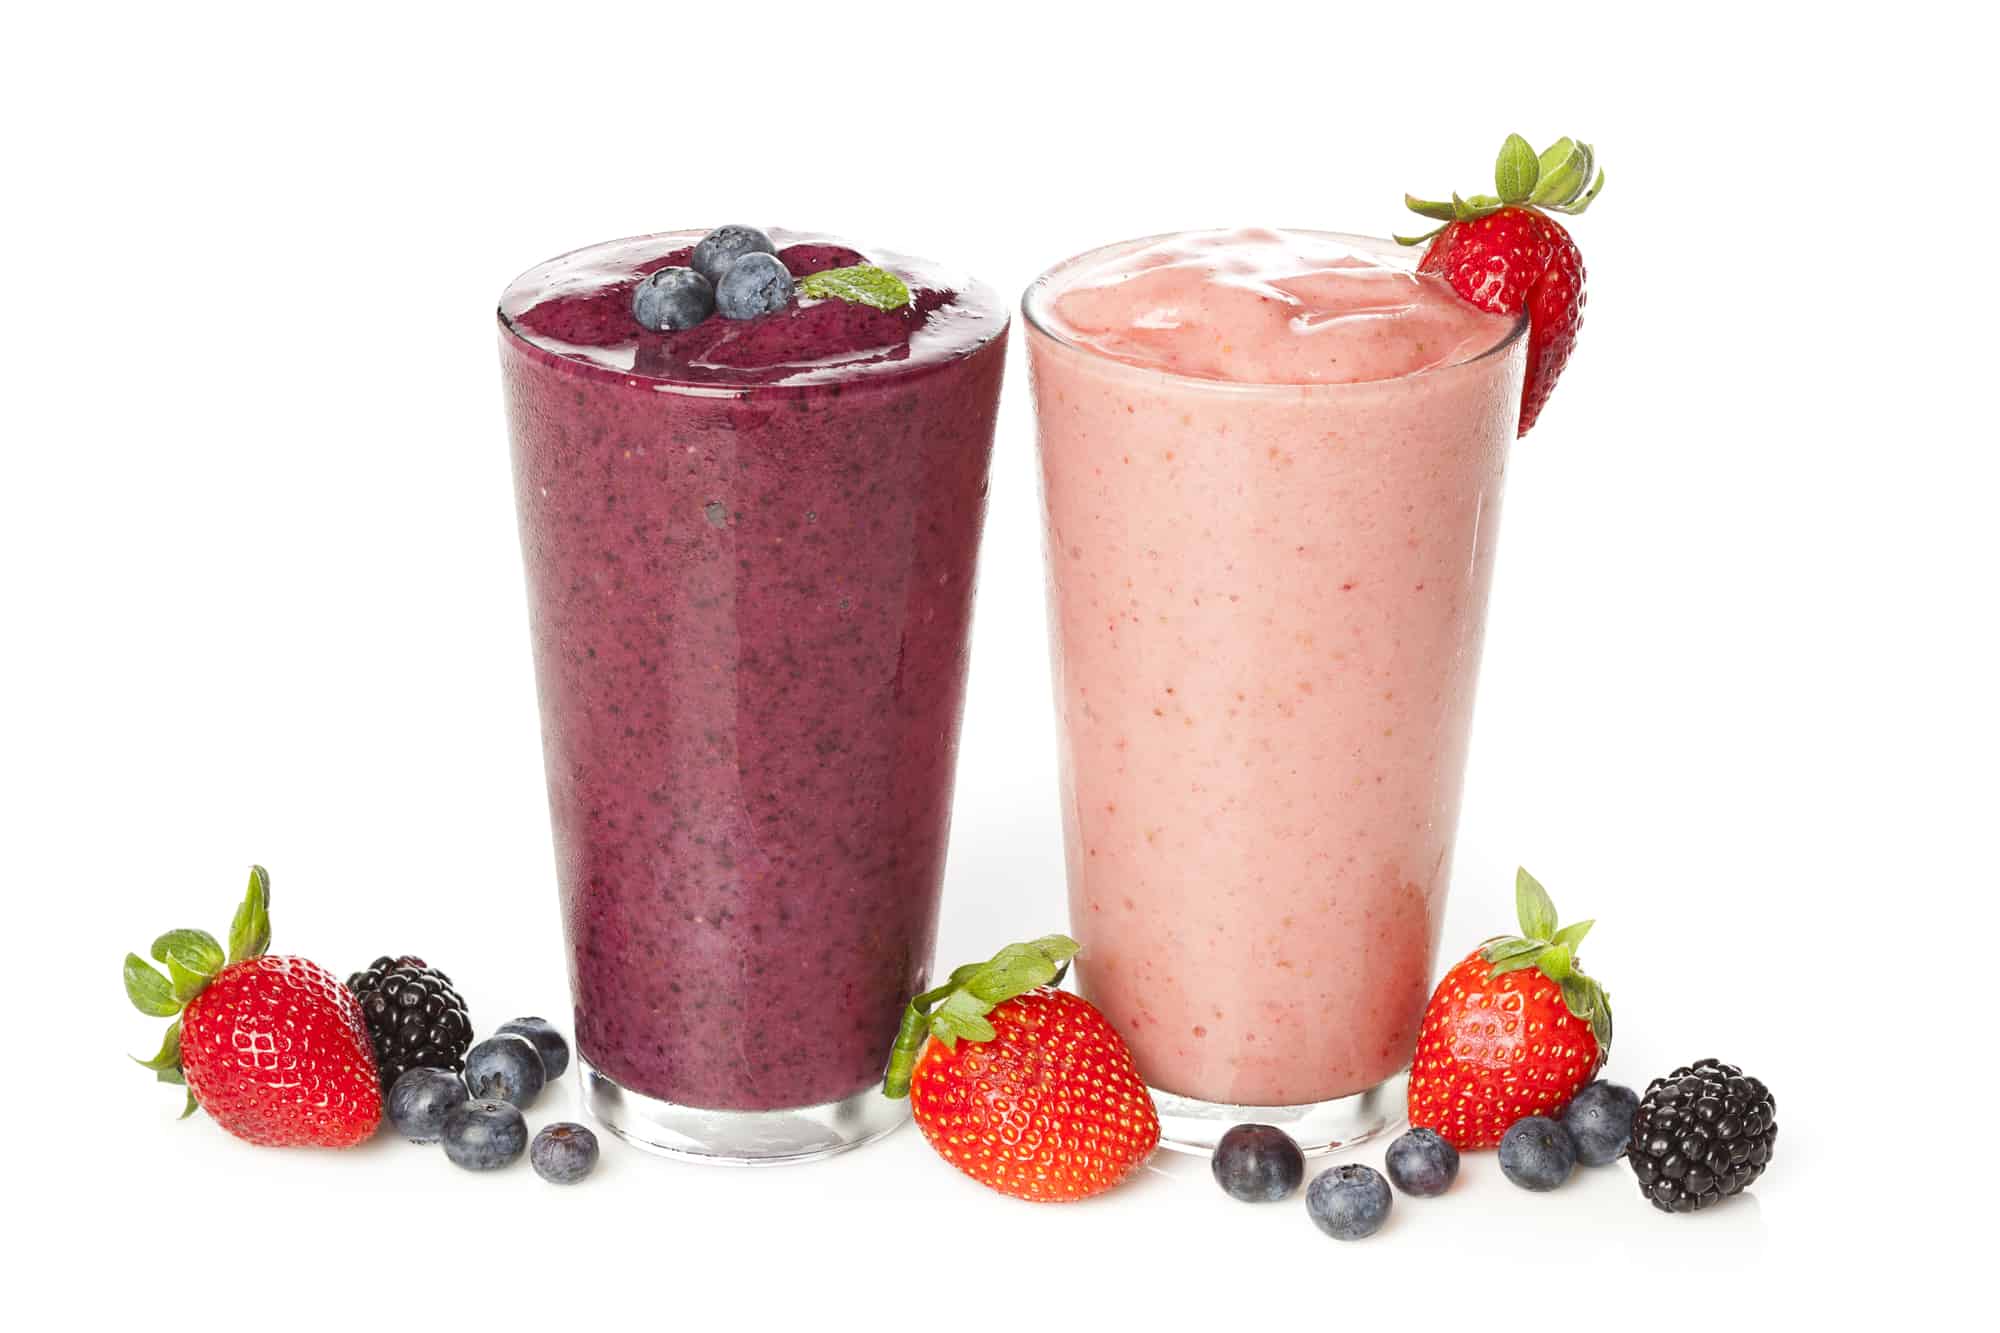 Do Smoothies lose nutrients overnight?